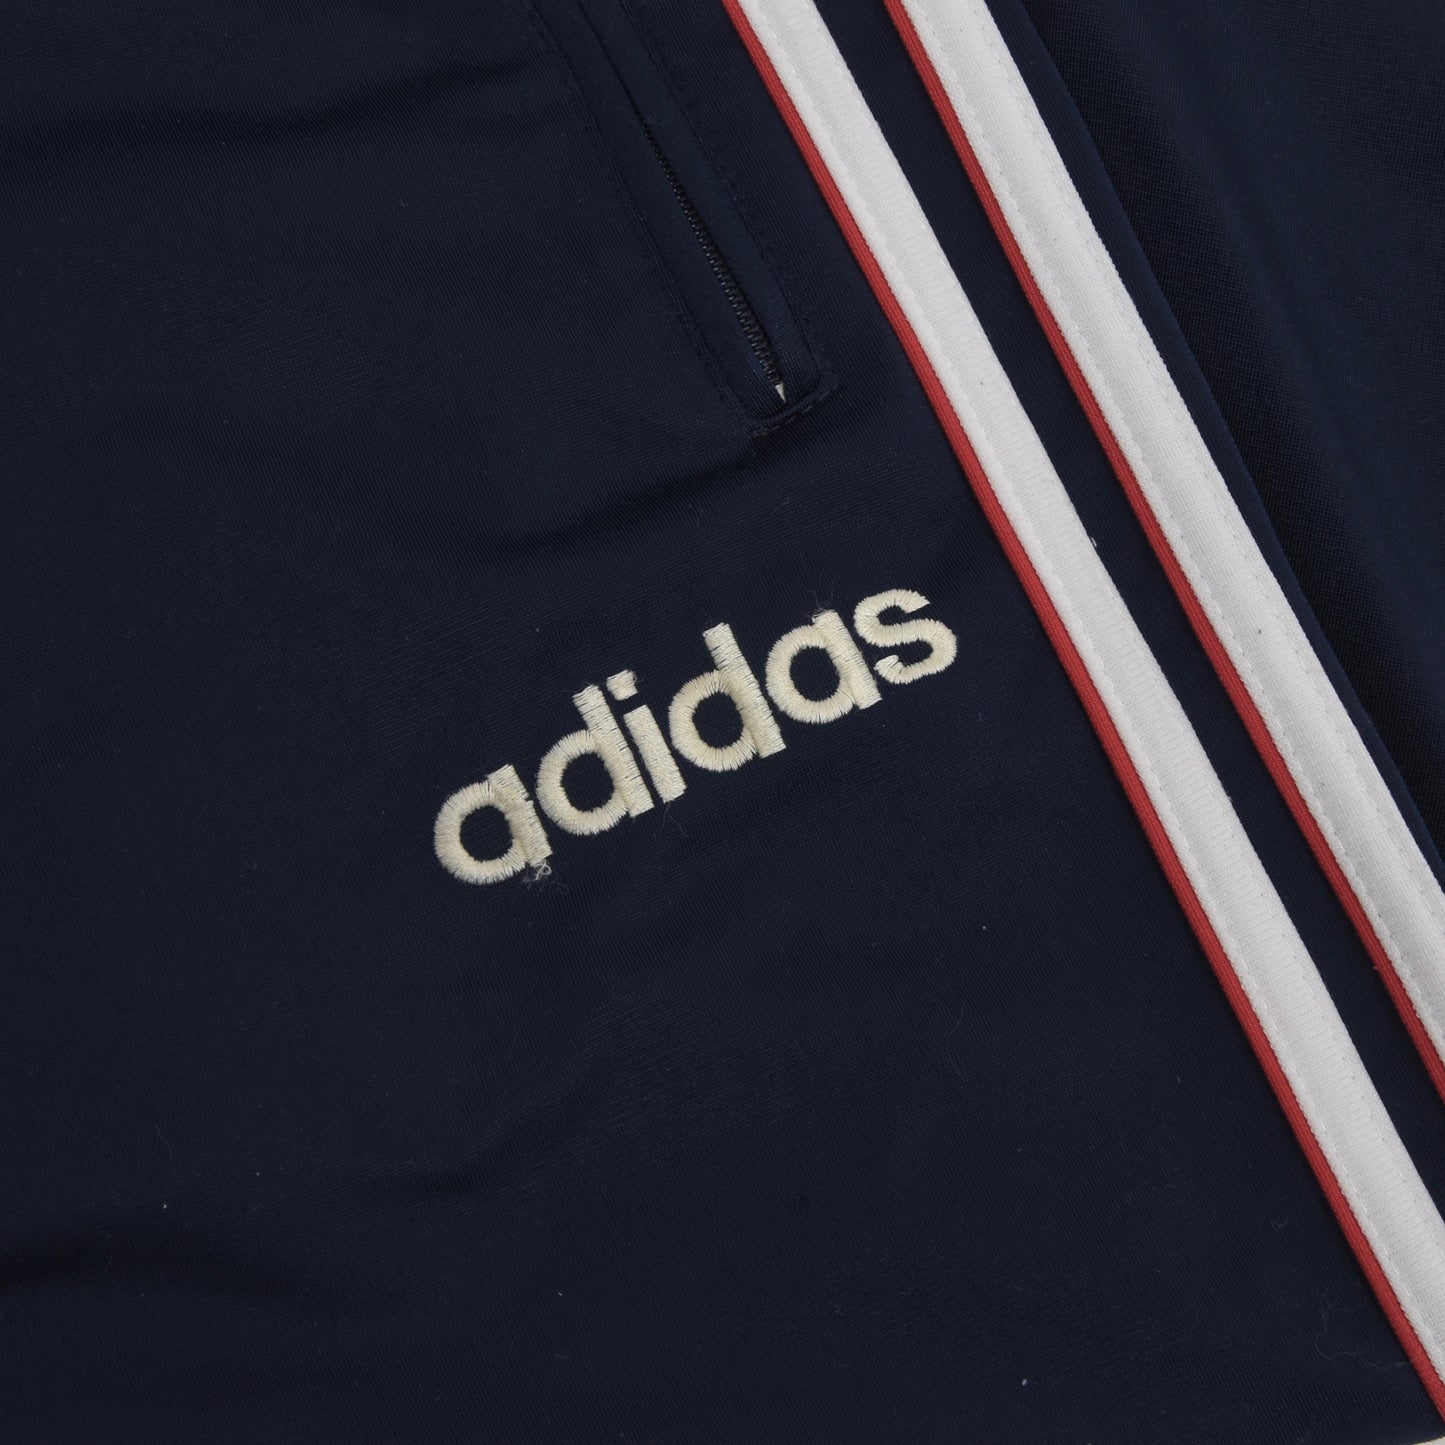 Vintage '90s Adidas Track Suit Size D7 - Red, White, Navy